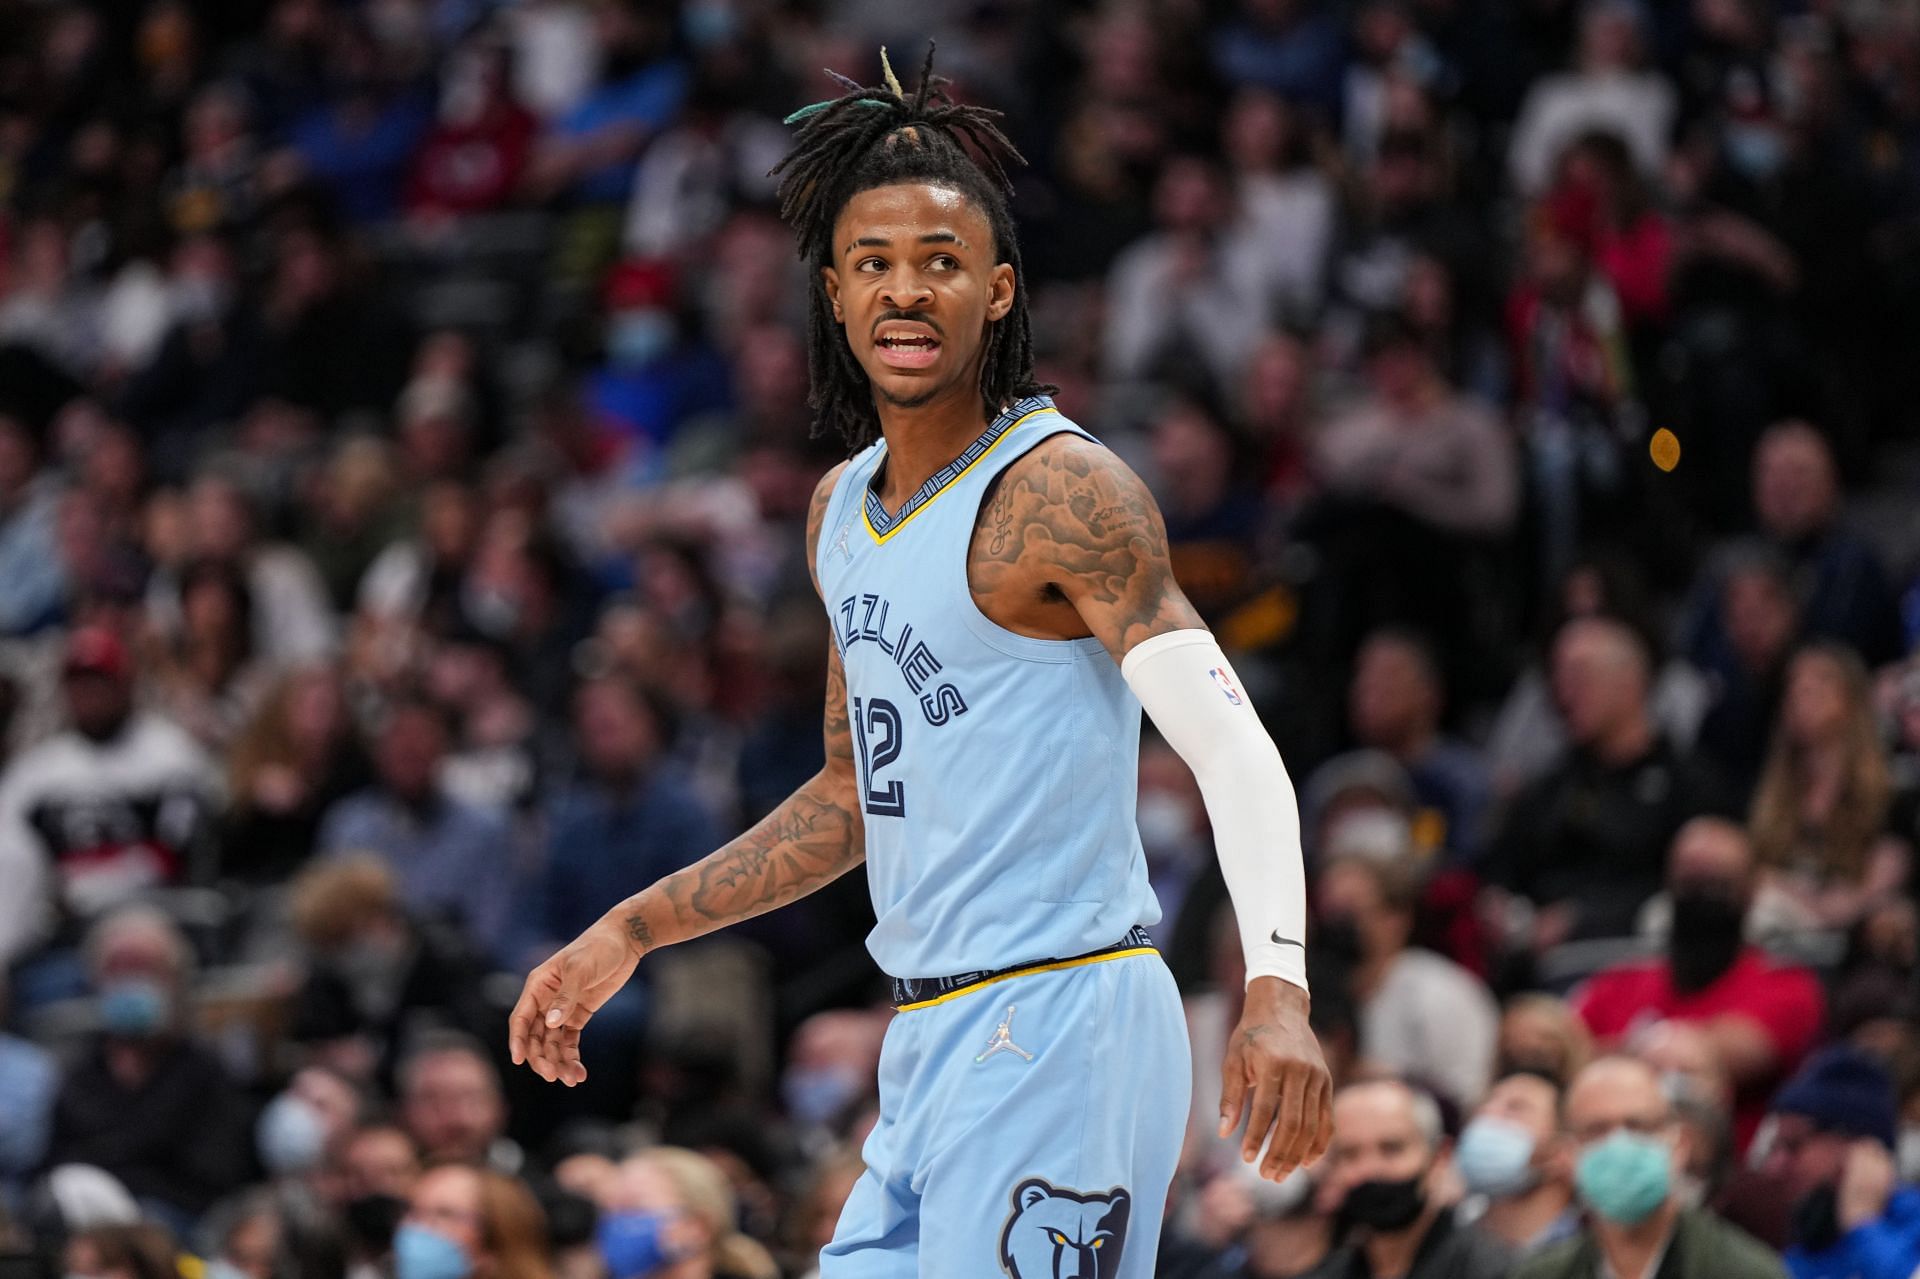 Ja Morant of the Memphis Grizzlies reacts against the Denver Nuggets on Jan. 21 in Denver, Colorado.